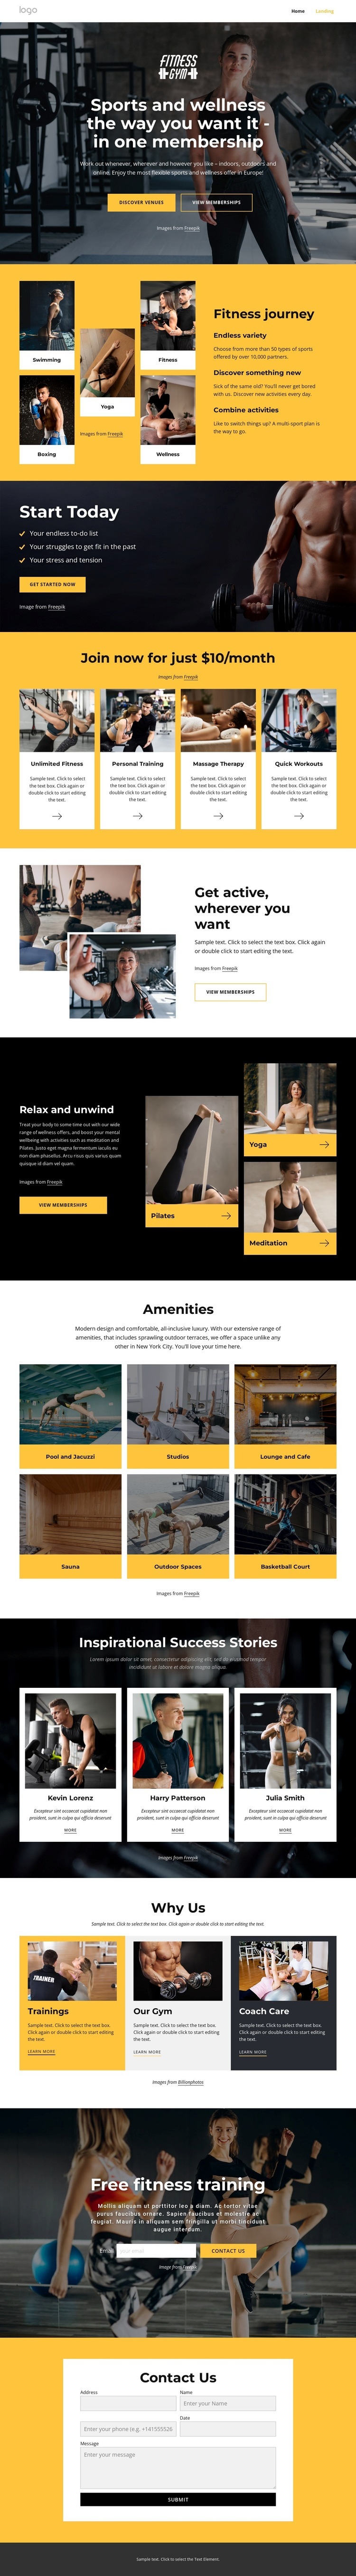 Gym, swimming, fitness classes Web Page Designer